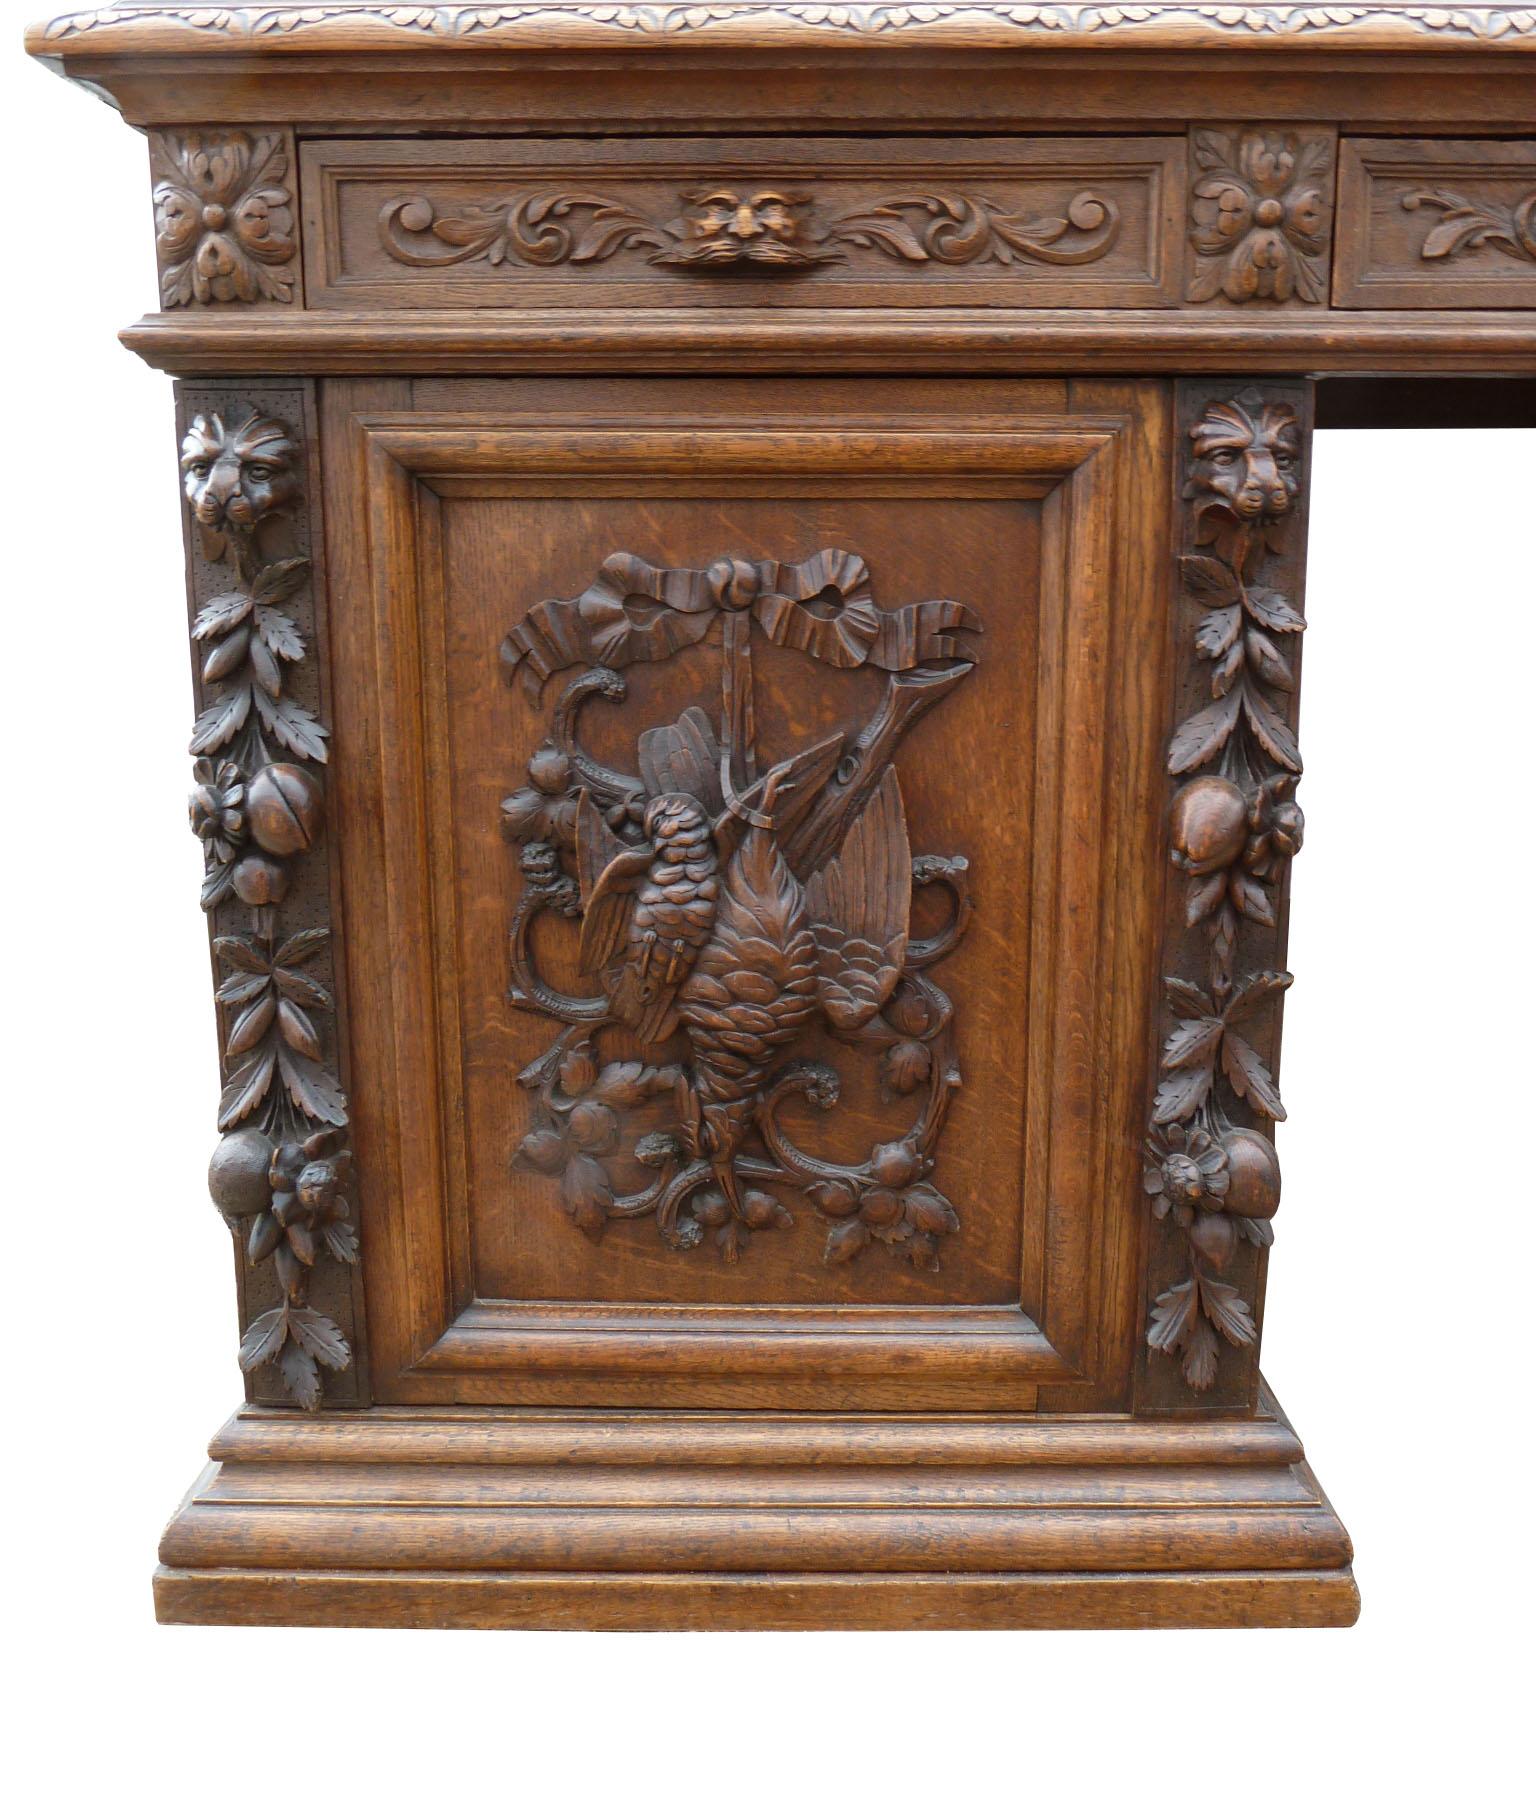 For sale is a flemmish carved oak sideboard. The sideboard has an elaborate mirror back with lion carvings at the top and fruit carvings to the sides. This is above three drawers with two cupboards below. Each cupboard has carvings of animals to the